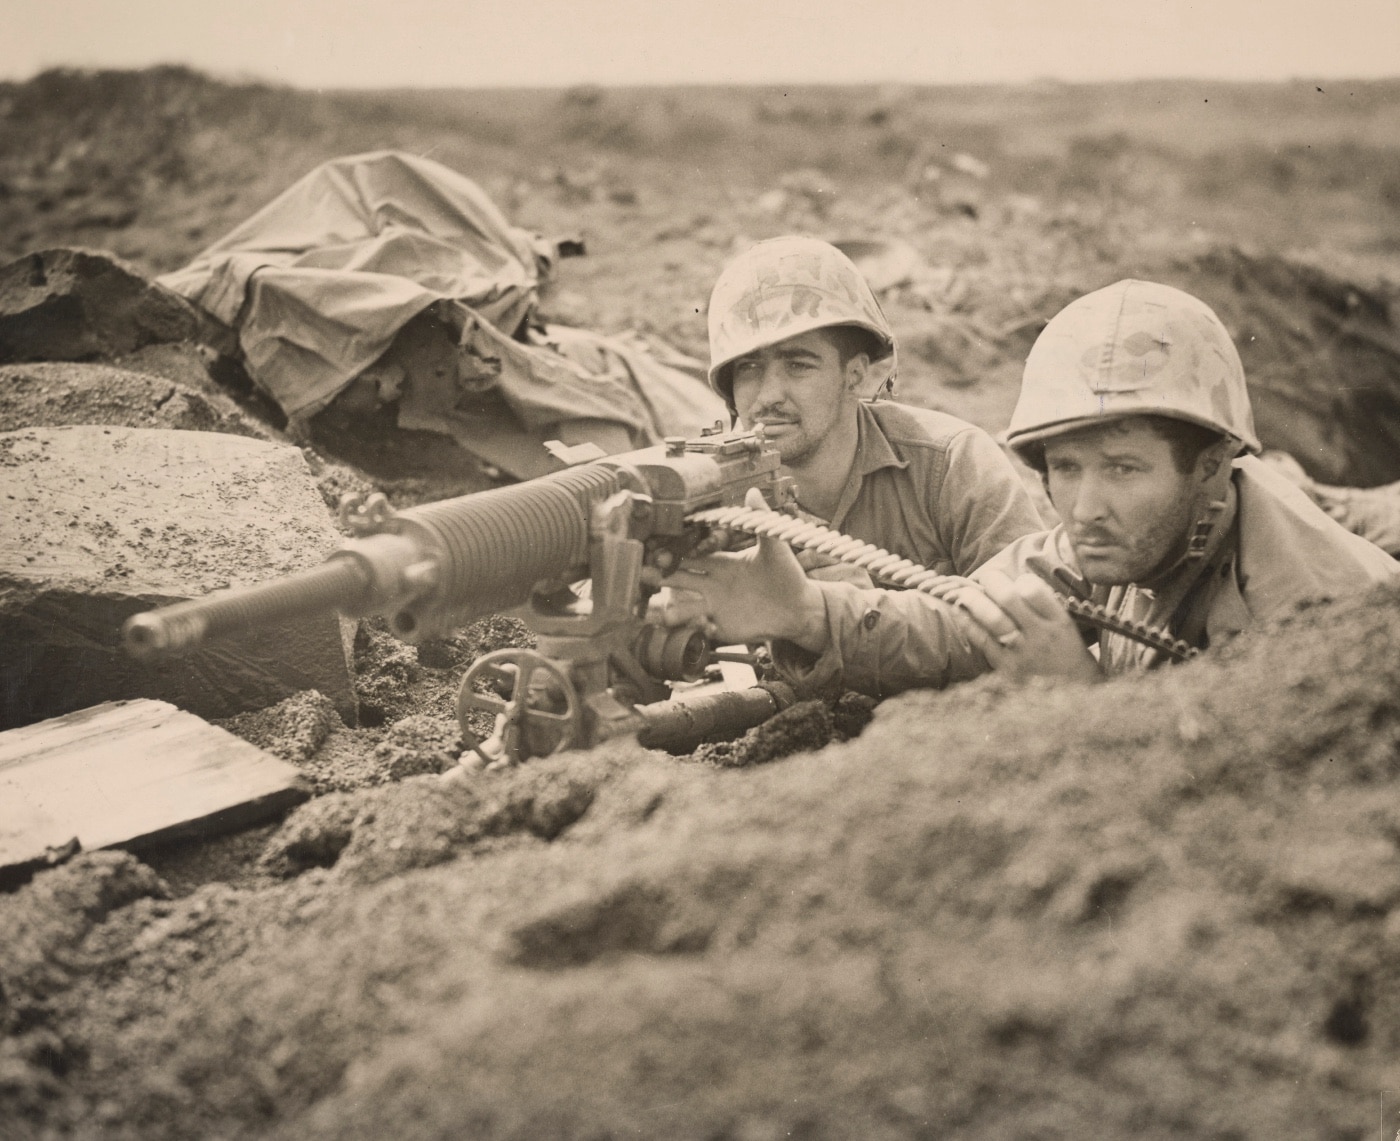 Shown are two U.S. Marines manning a Japanese Type 3 heavy machine gun during the Battle of Iwo Jima in World War II. The Type 3 was based on the French Hotchkiss Model 1914 machine gun chambered for the 6.5x50 Arisaka cartridge. Japan licensed the design and made a number of variations of the crew served firearm. 